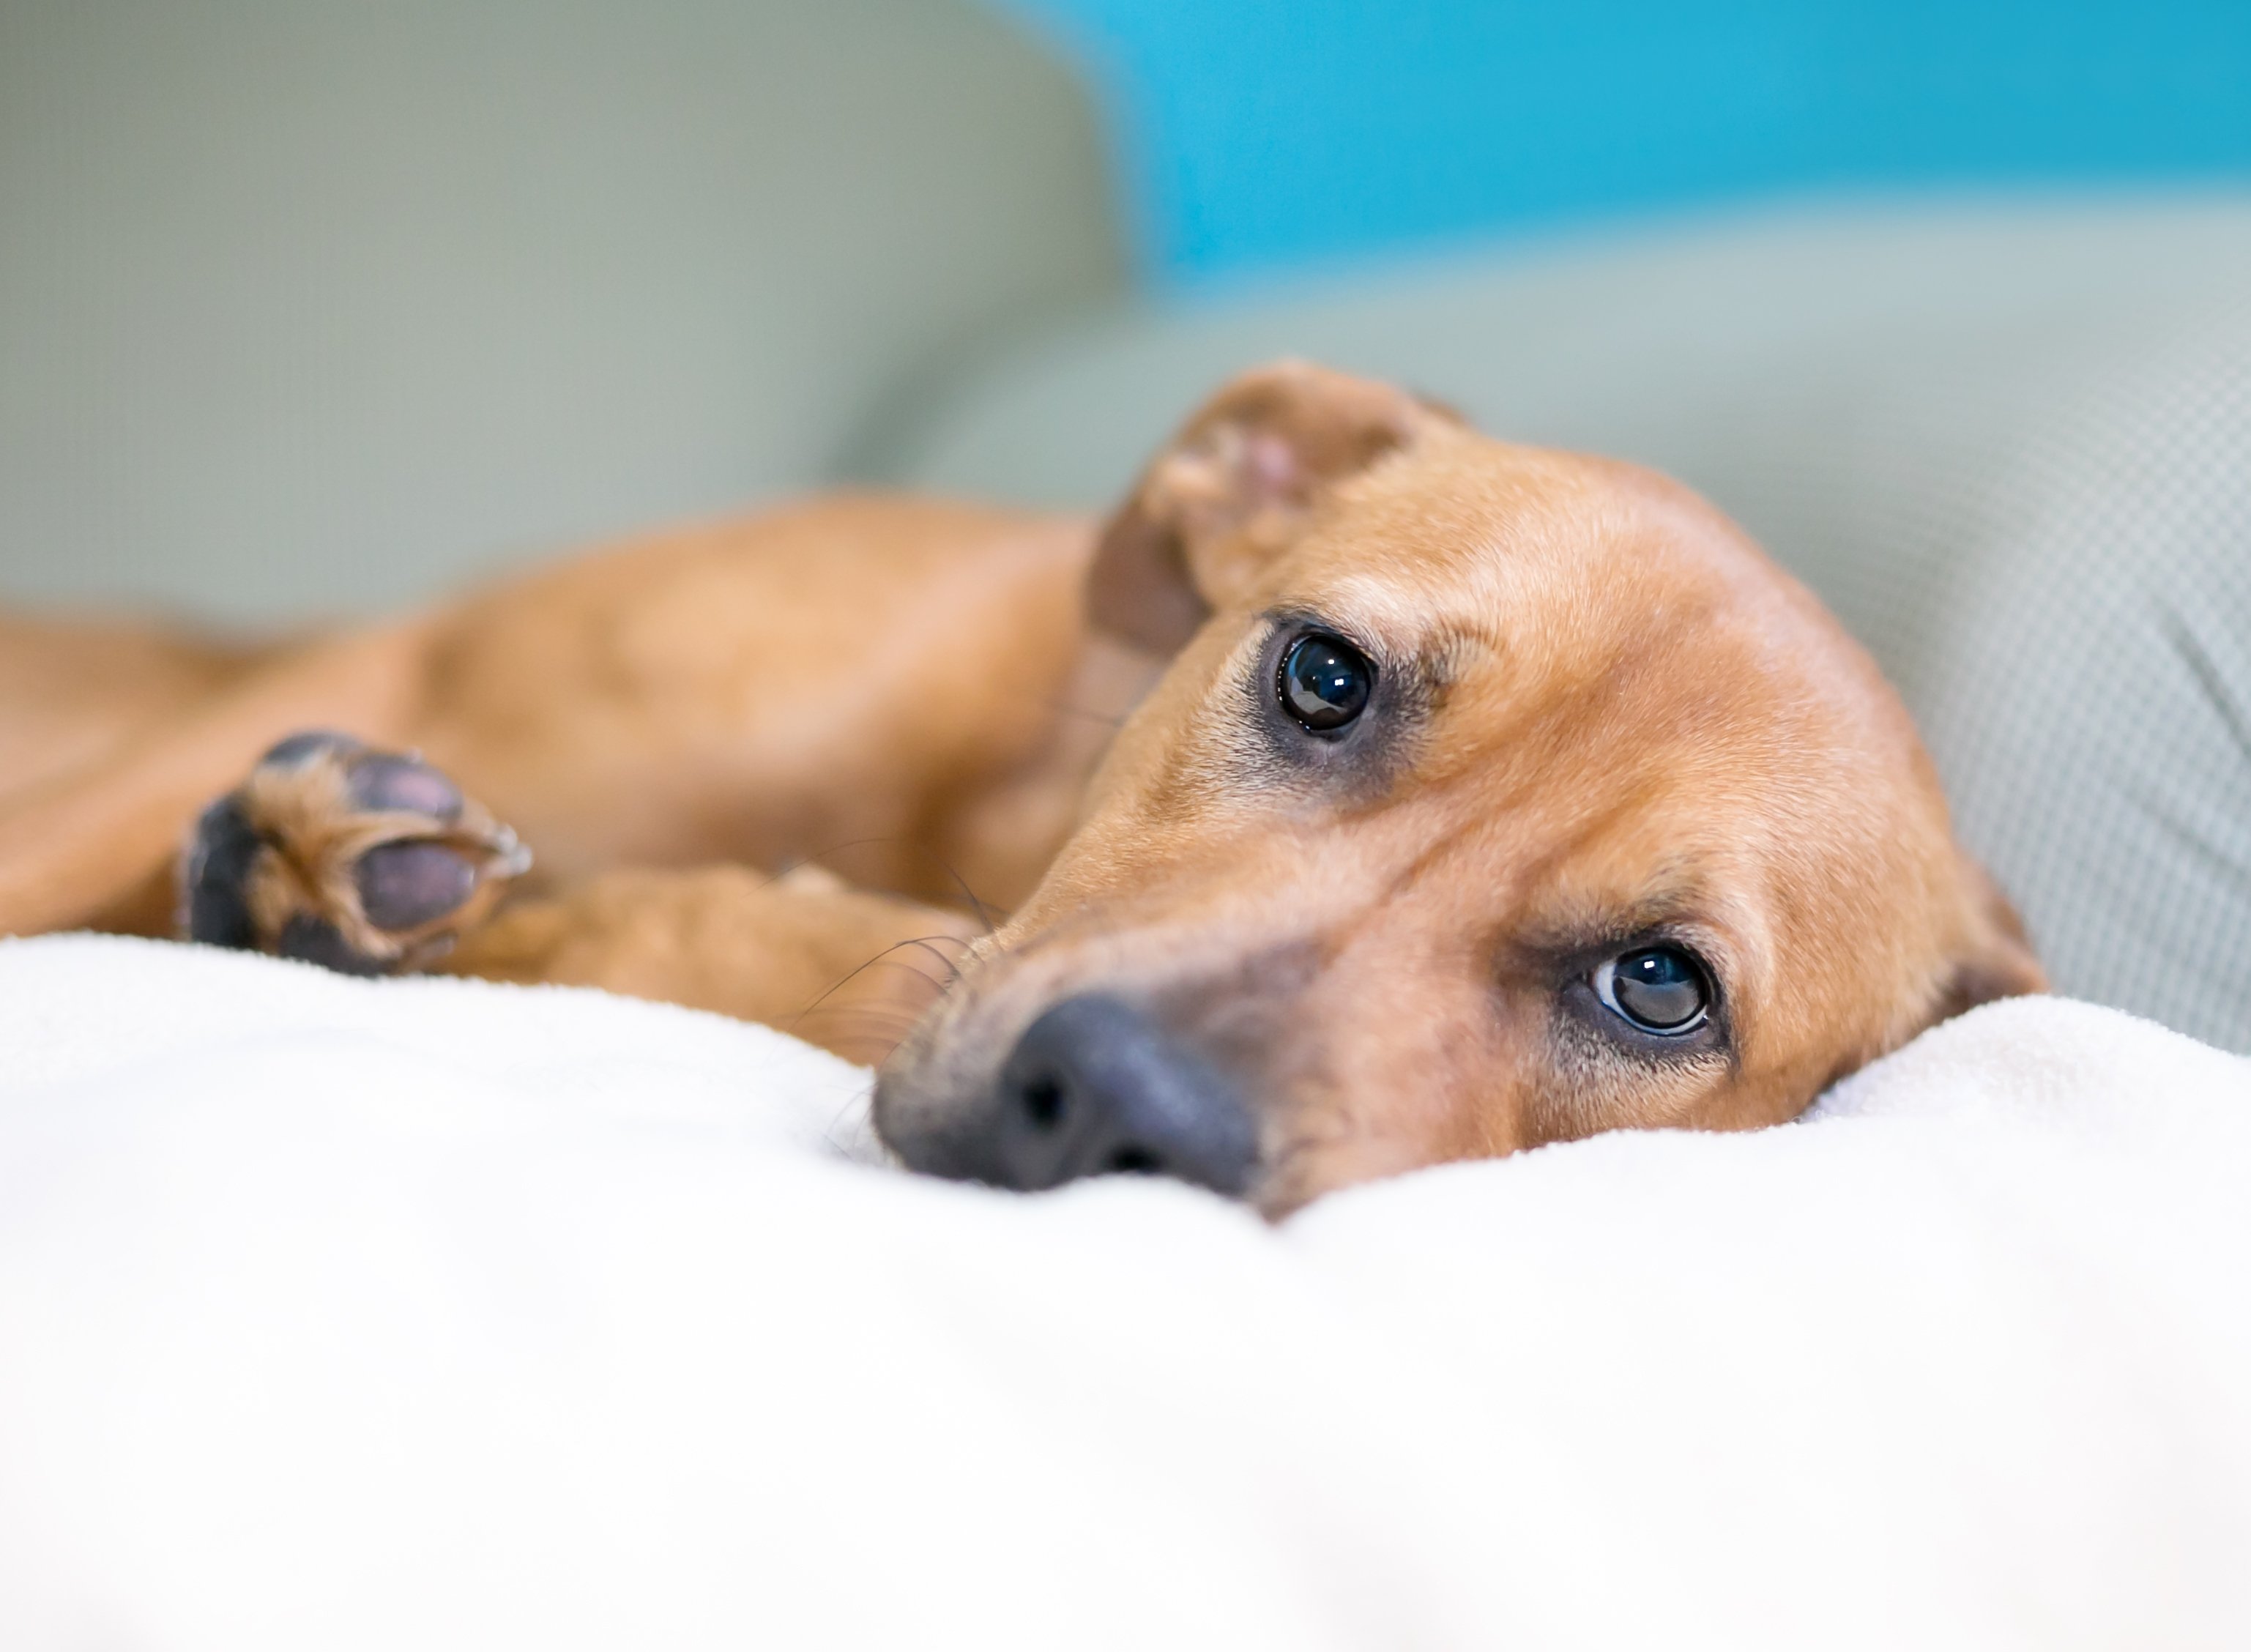 A dog with a sad expression lying on a couch | Photo: Shutterstock/Mary Swift 